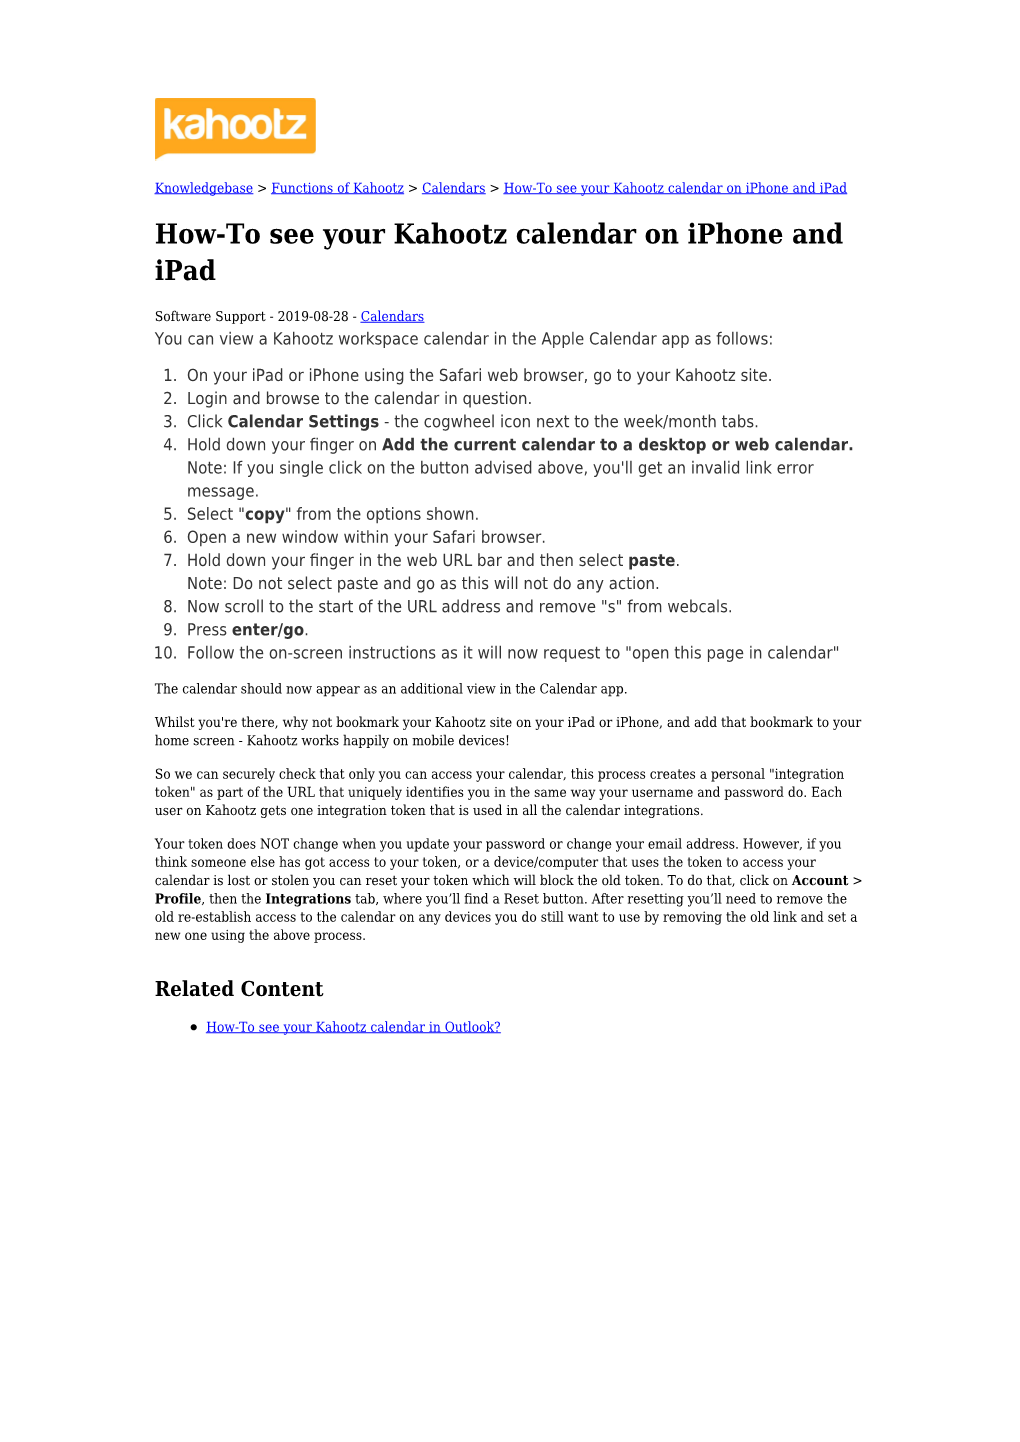 How-To See Your Kahootz Calendar on Iphone and Ipad How-To See Your Kahootz Calendar on Iphone and Ipad